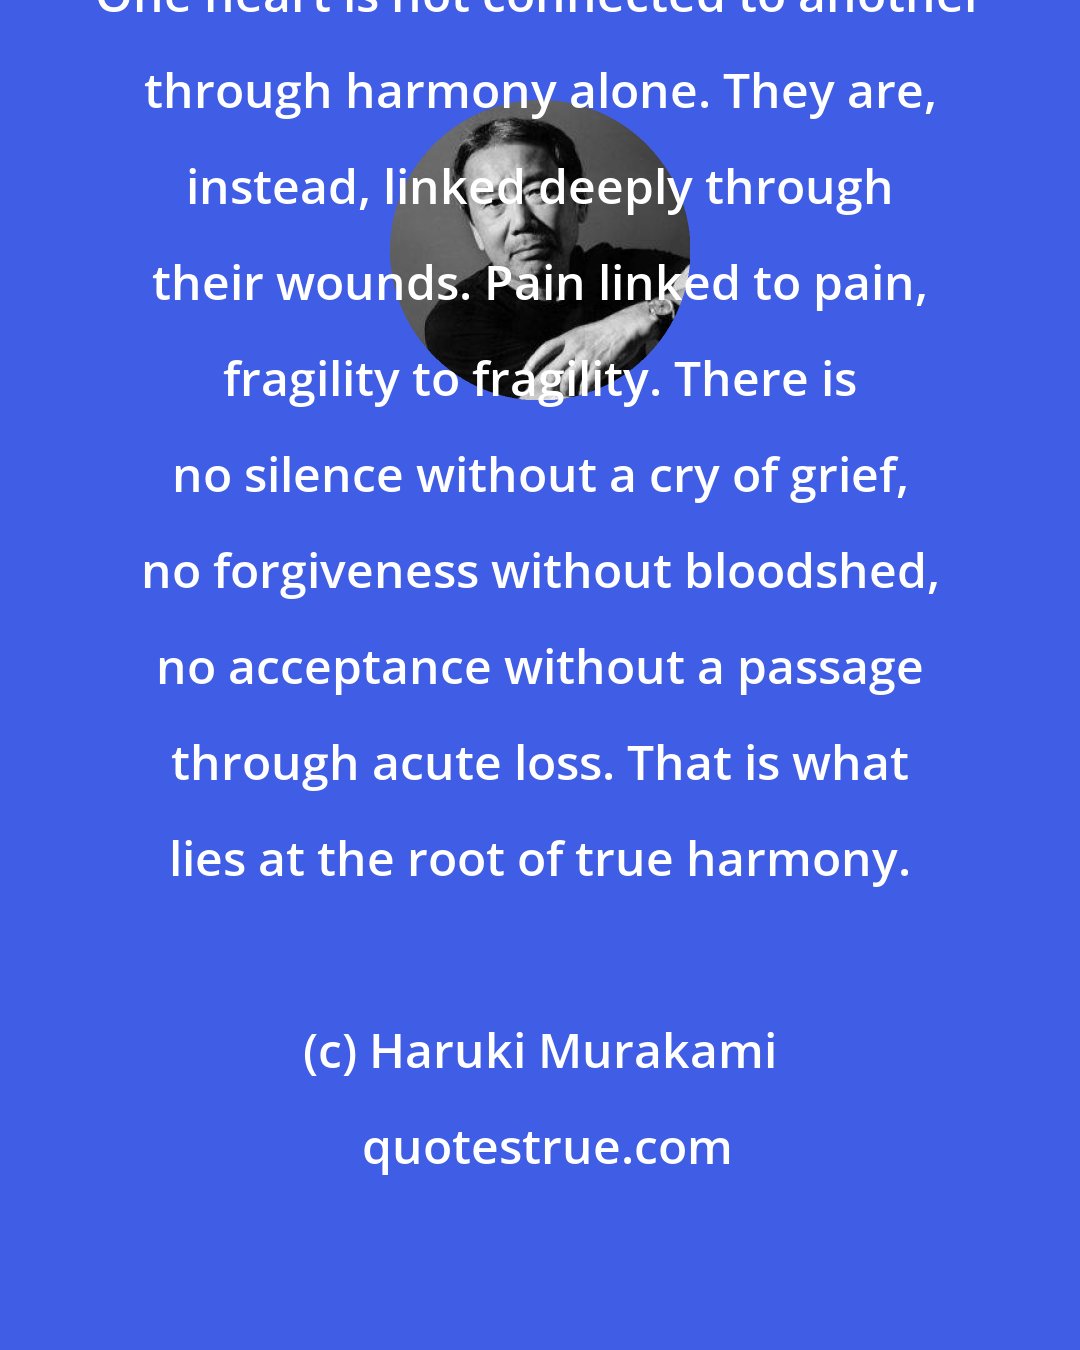 Haruki Murakami: One heart is not connected to another through harmony alone. They are, instead, linked deeply through their wounds. Pain linked to pain, fragility to fragility. There is no silence without a cry of grief, no forgiveness without bloodshed, no acceptance without a passage through acute loss. That is what lies at the root of true harmony.